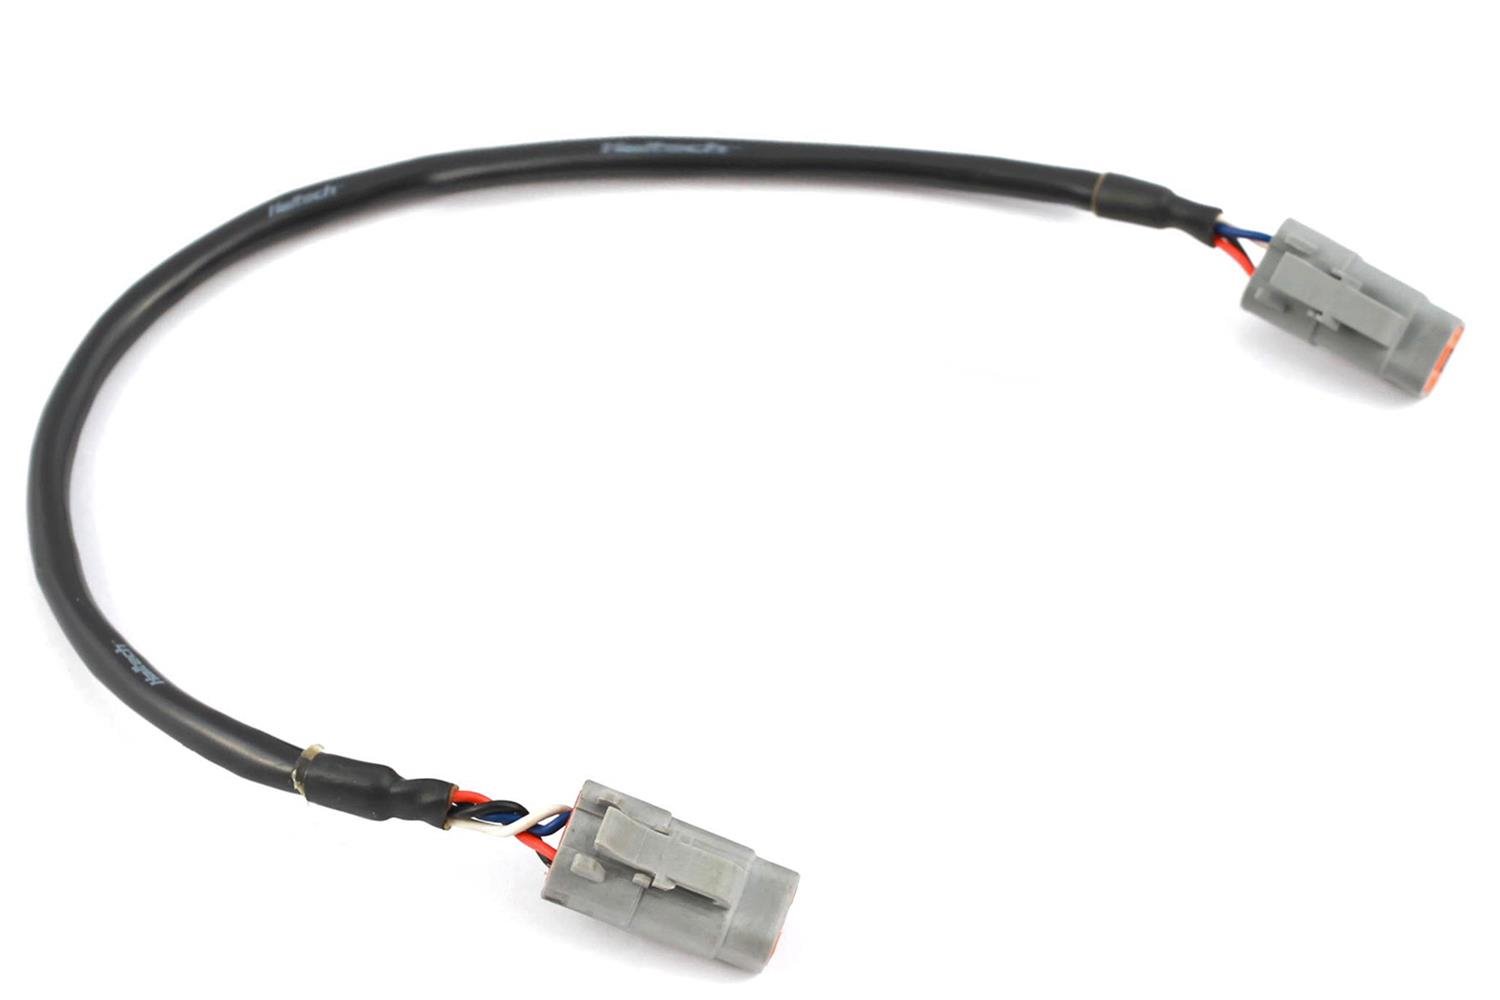 HT-130028 Elite CAN Cable, DTM-4 to DTM-4, 3000 mm (120 in.)